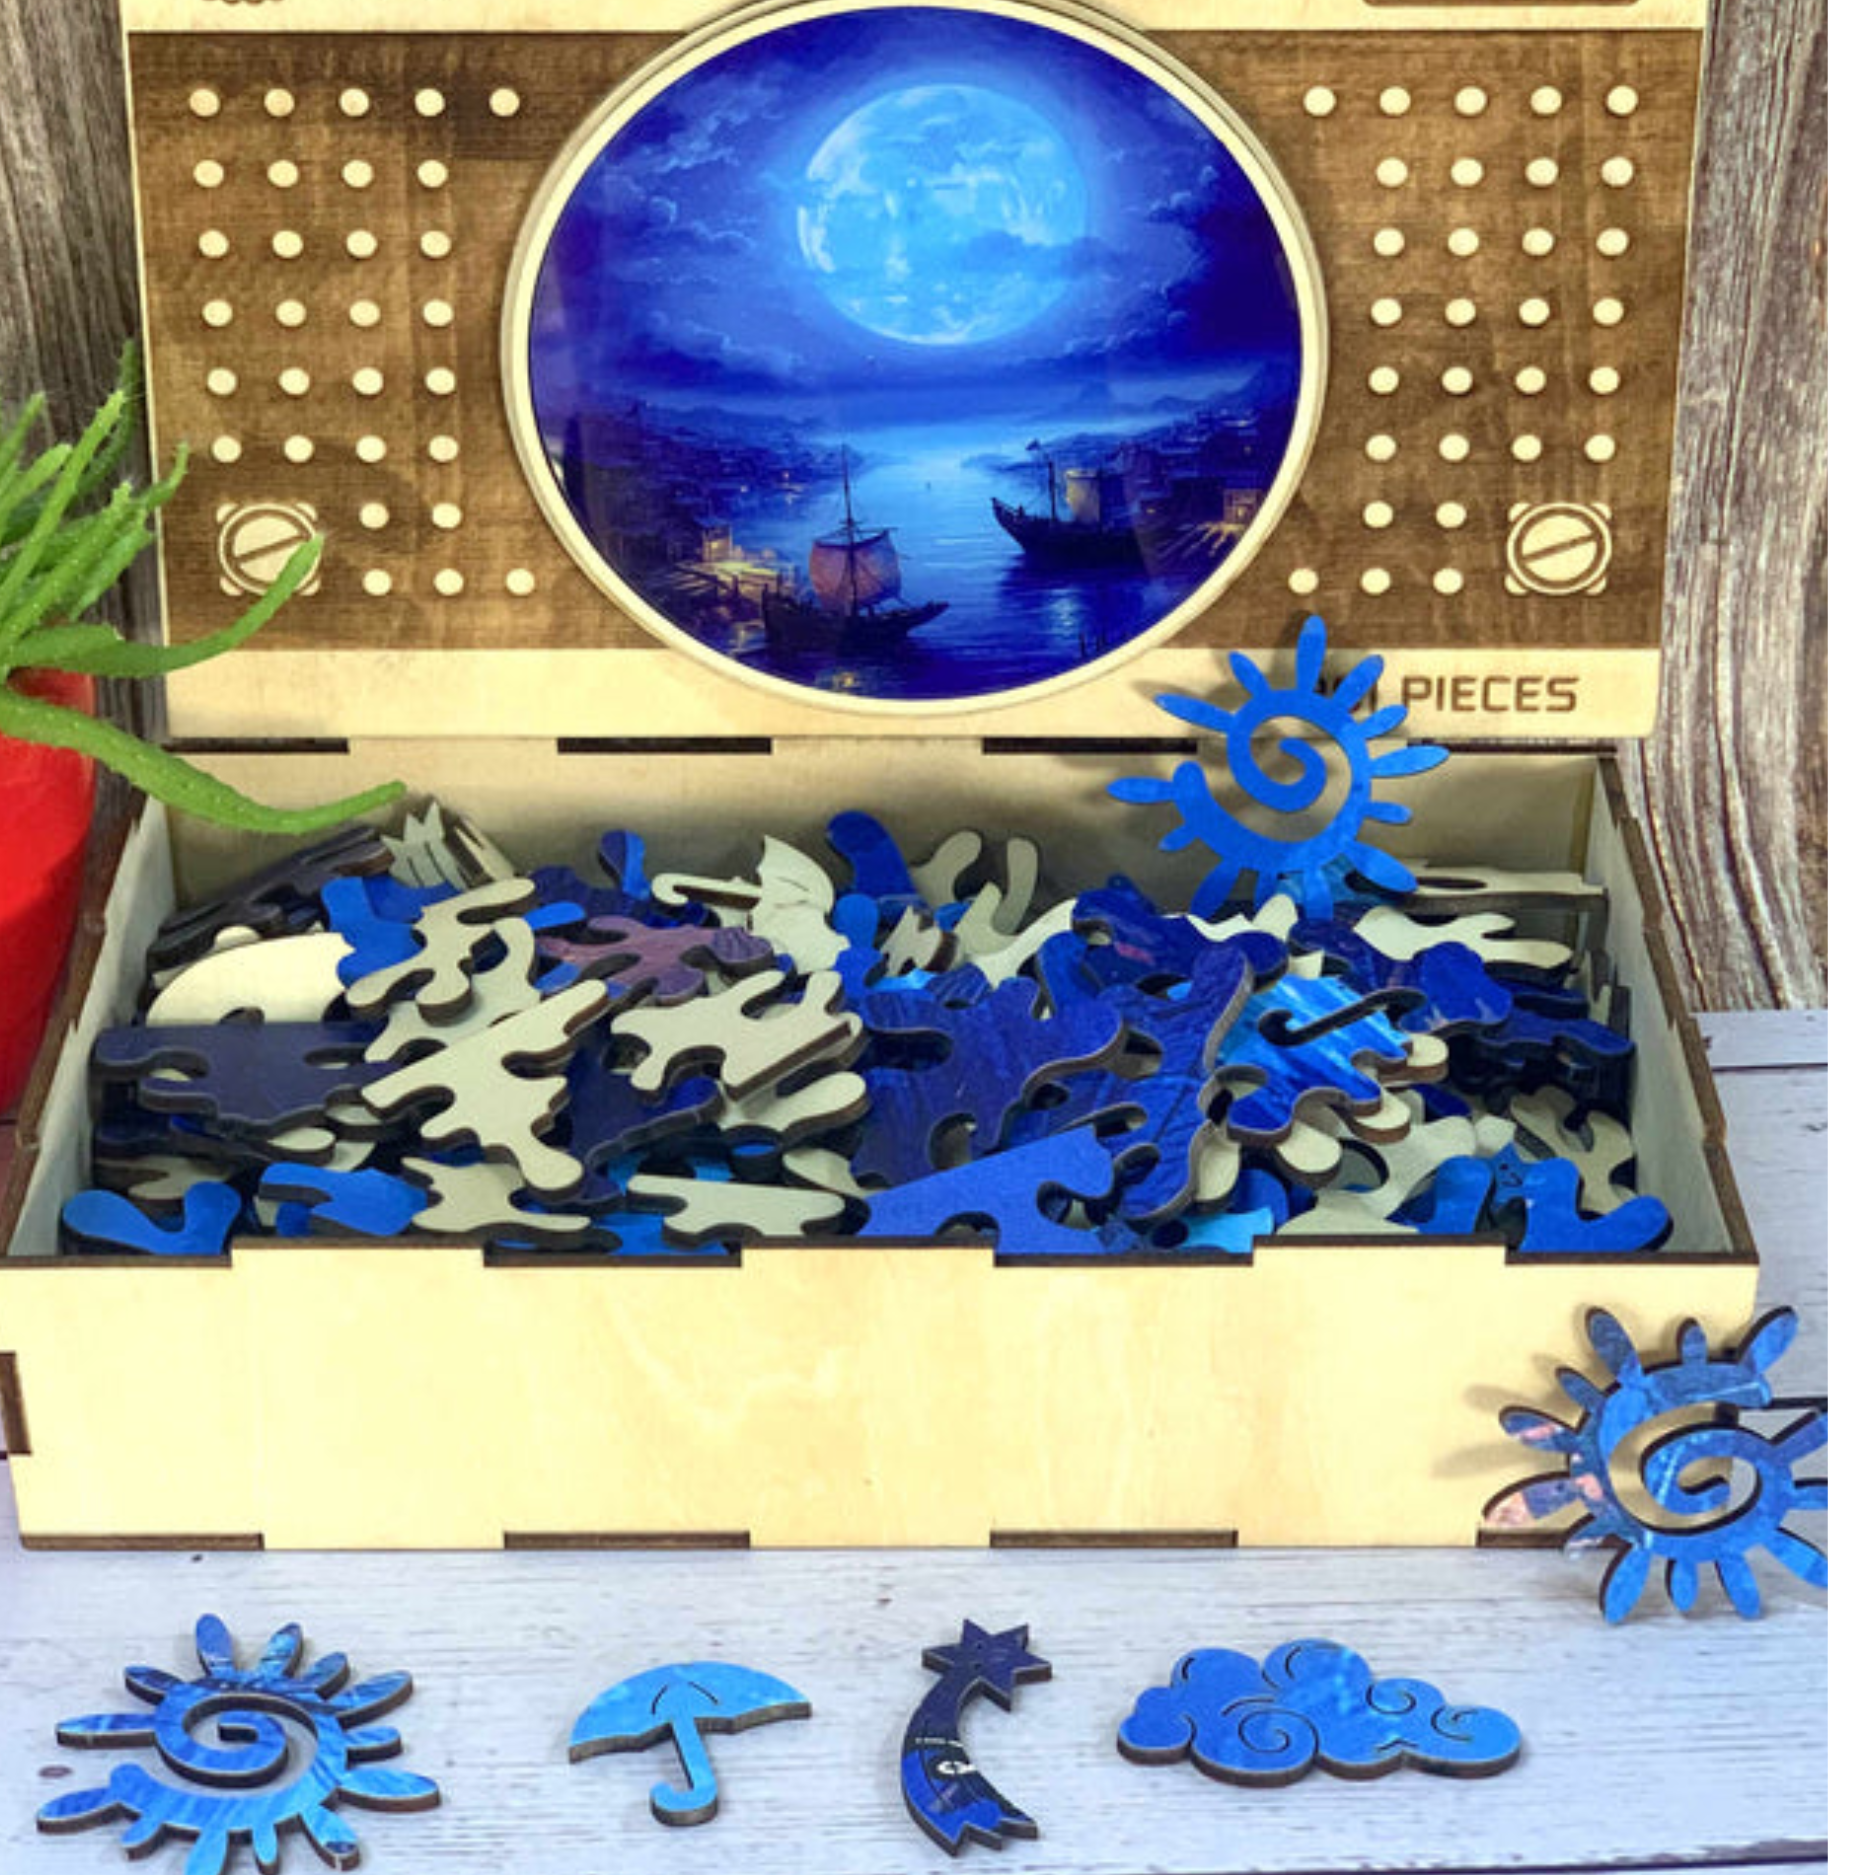 Bluemoon wooden puzzle